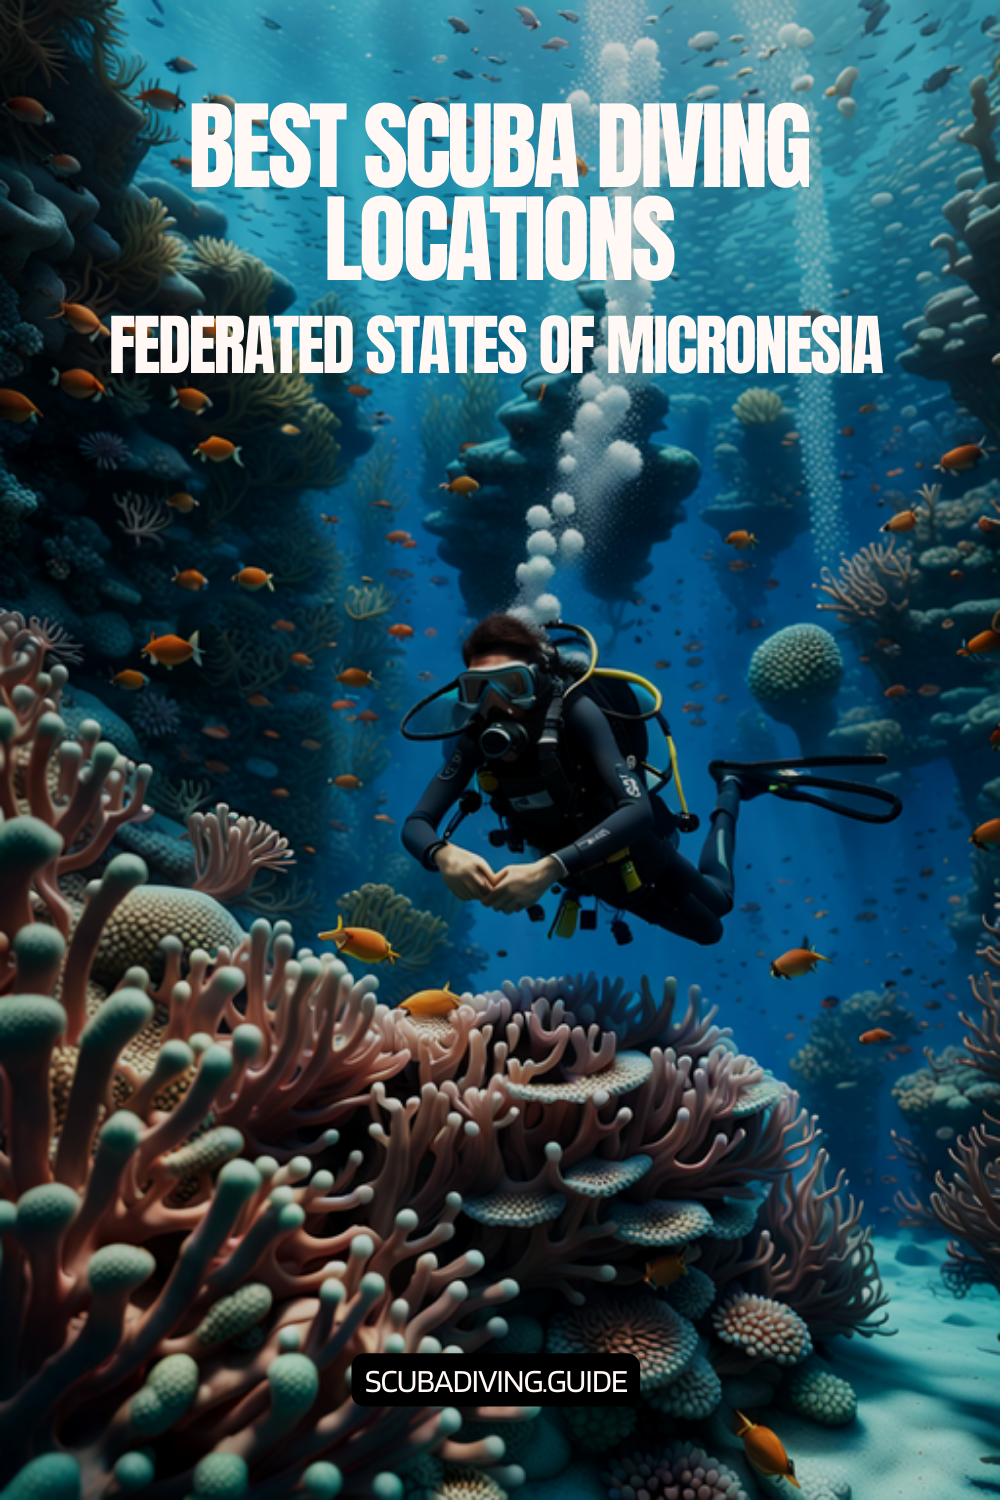 Scuba Diving Locations in The Federated States Of Micronesia